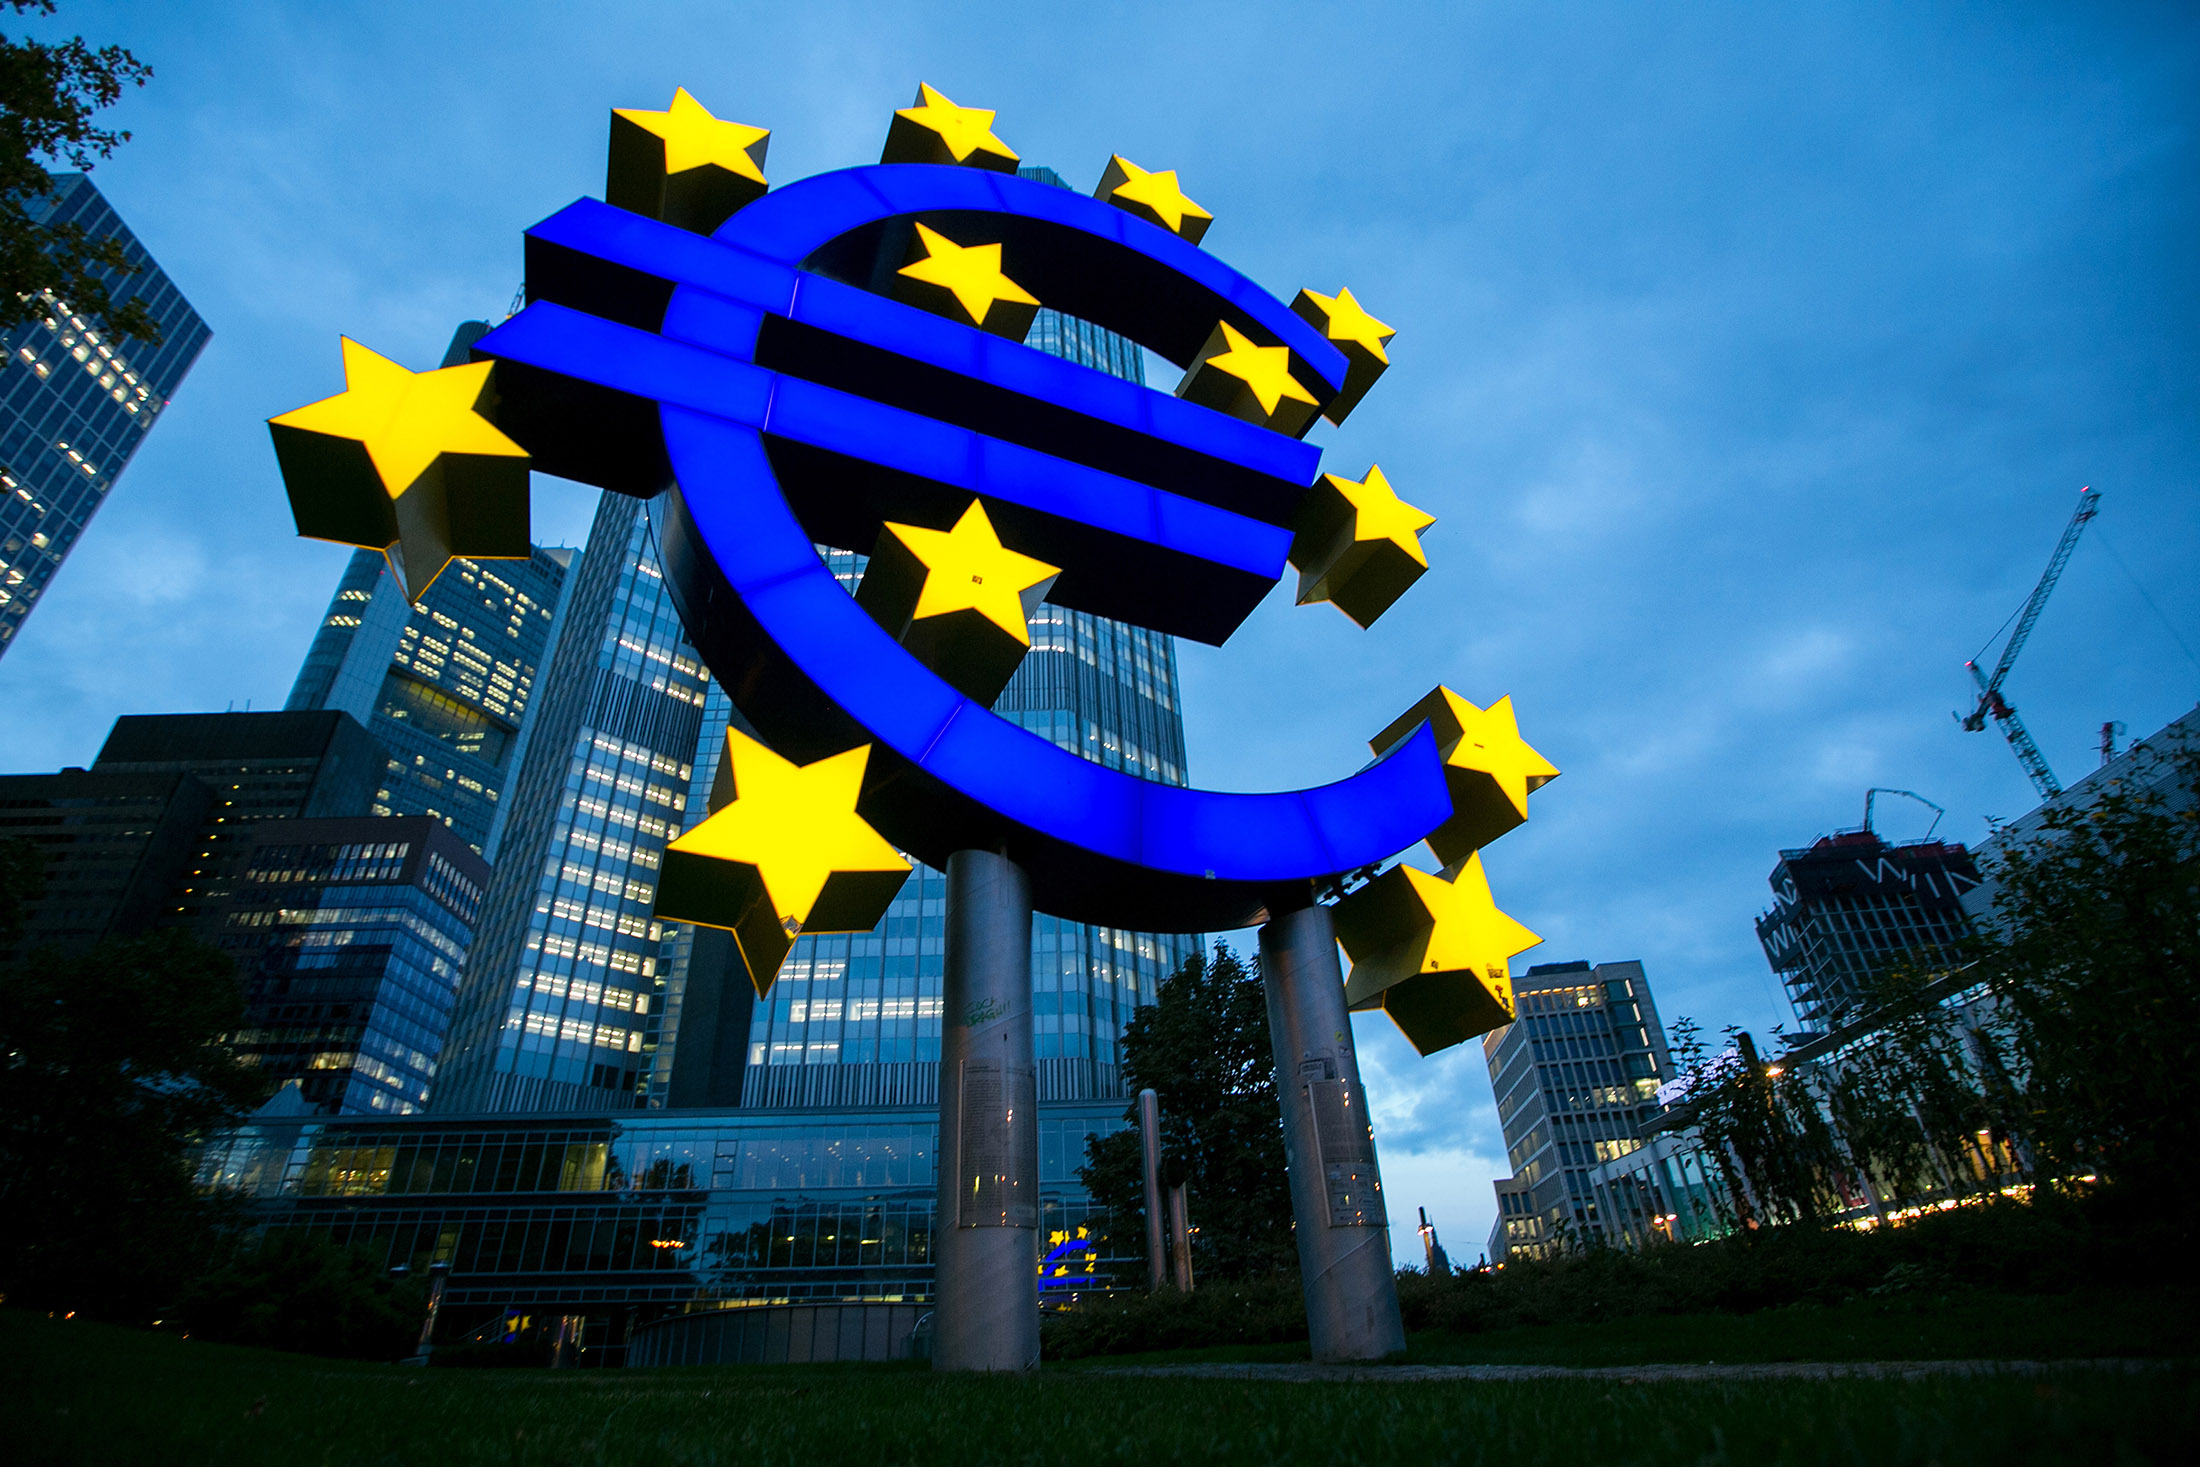 The euro sign sculpture stands illuminated outside the former European Central Bank (ECB) headquarters at dusk in Frankfurt, Germany, on Thursday, Oct. 20, 2016. Unlike Deutsche Bank, which announced plans in June to reduce its branches to 535 from 723 next year, Commerzbank says its branch network is key to its strategy to add two million new clients by 2020, double its previous target.
